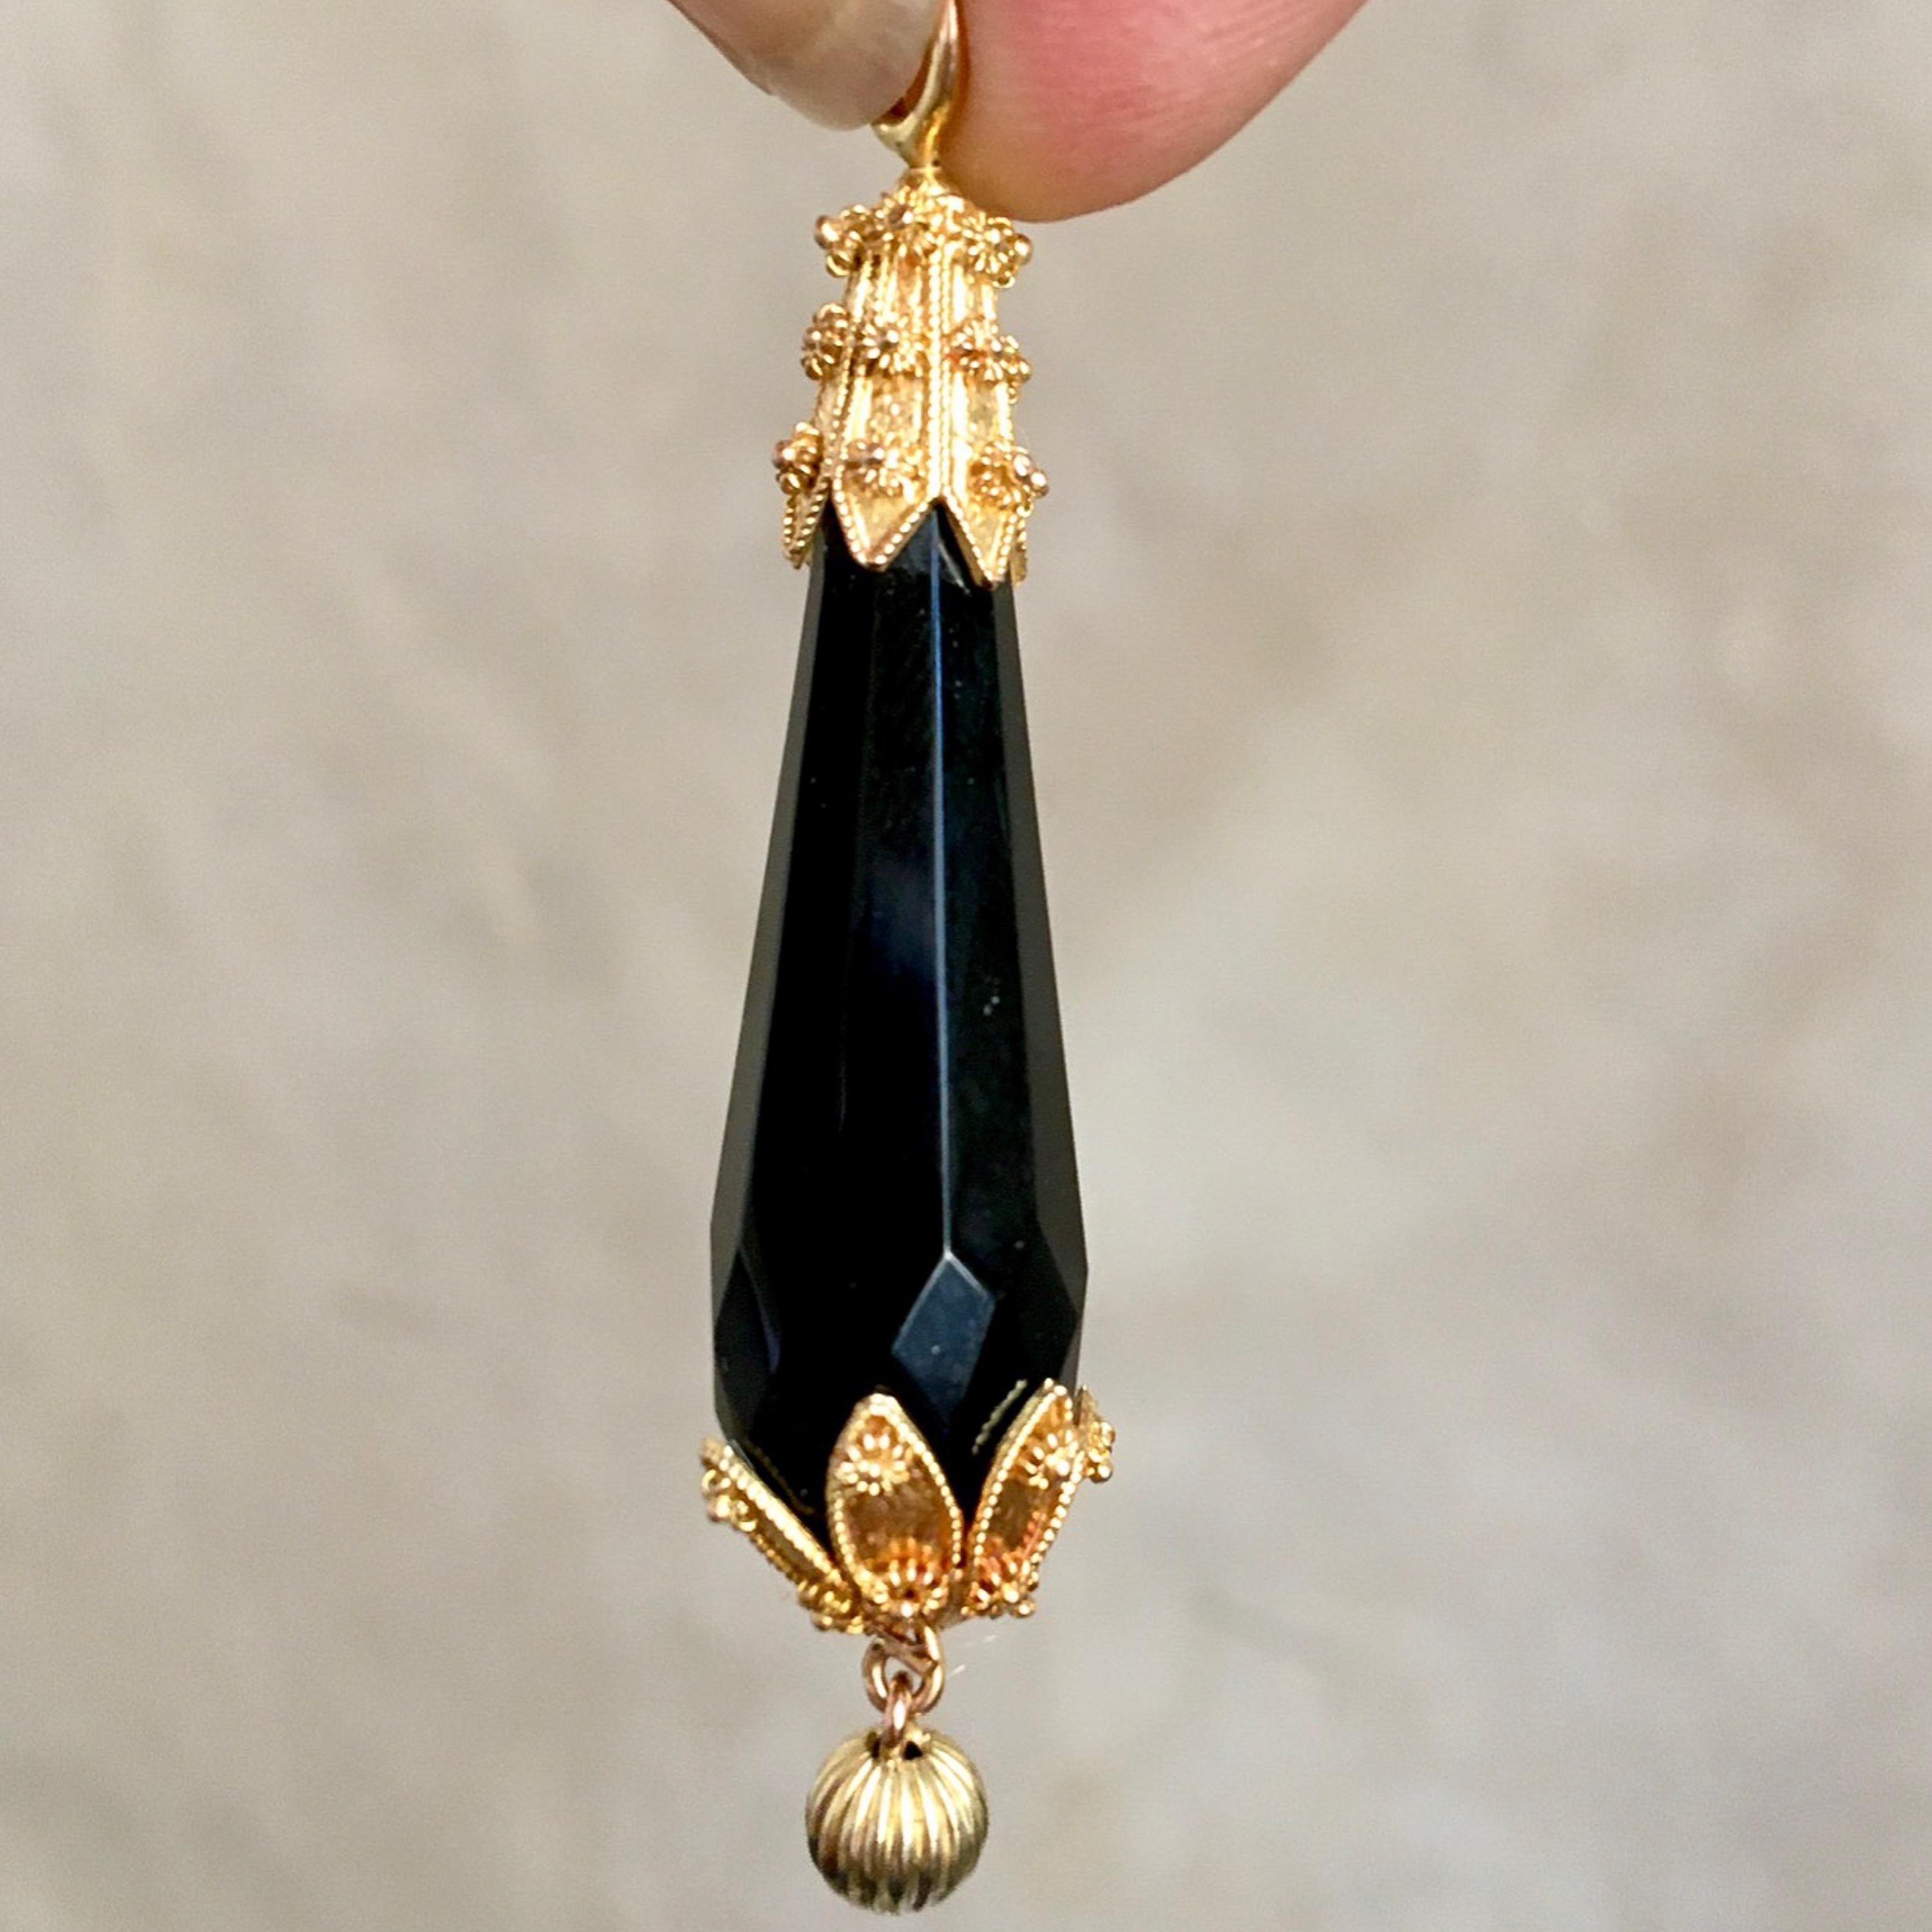 An early 20th century faceted black jet briolette cannetille pendant. This pendant is created with 14 karat gold cannetille work caps at the top and bottom. The top and bottom of the pendant is adorned with spider-like rosette ornaments and groove